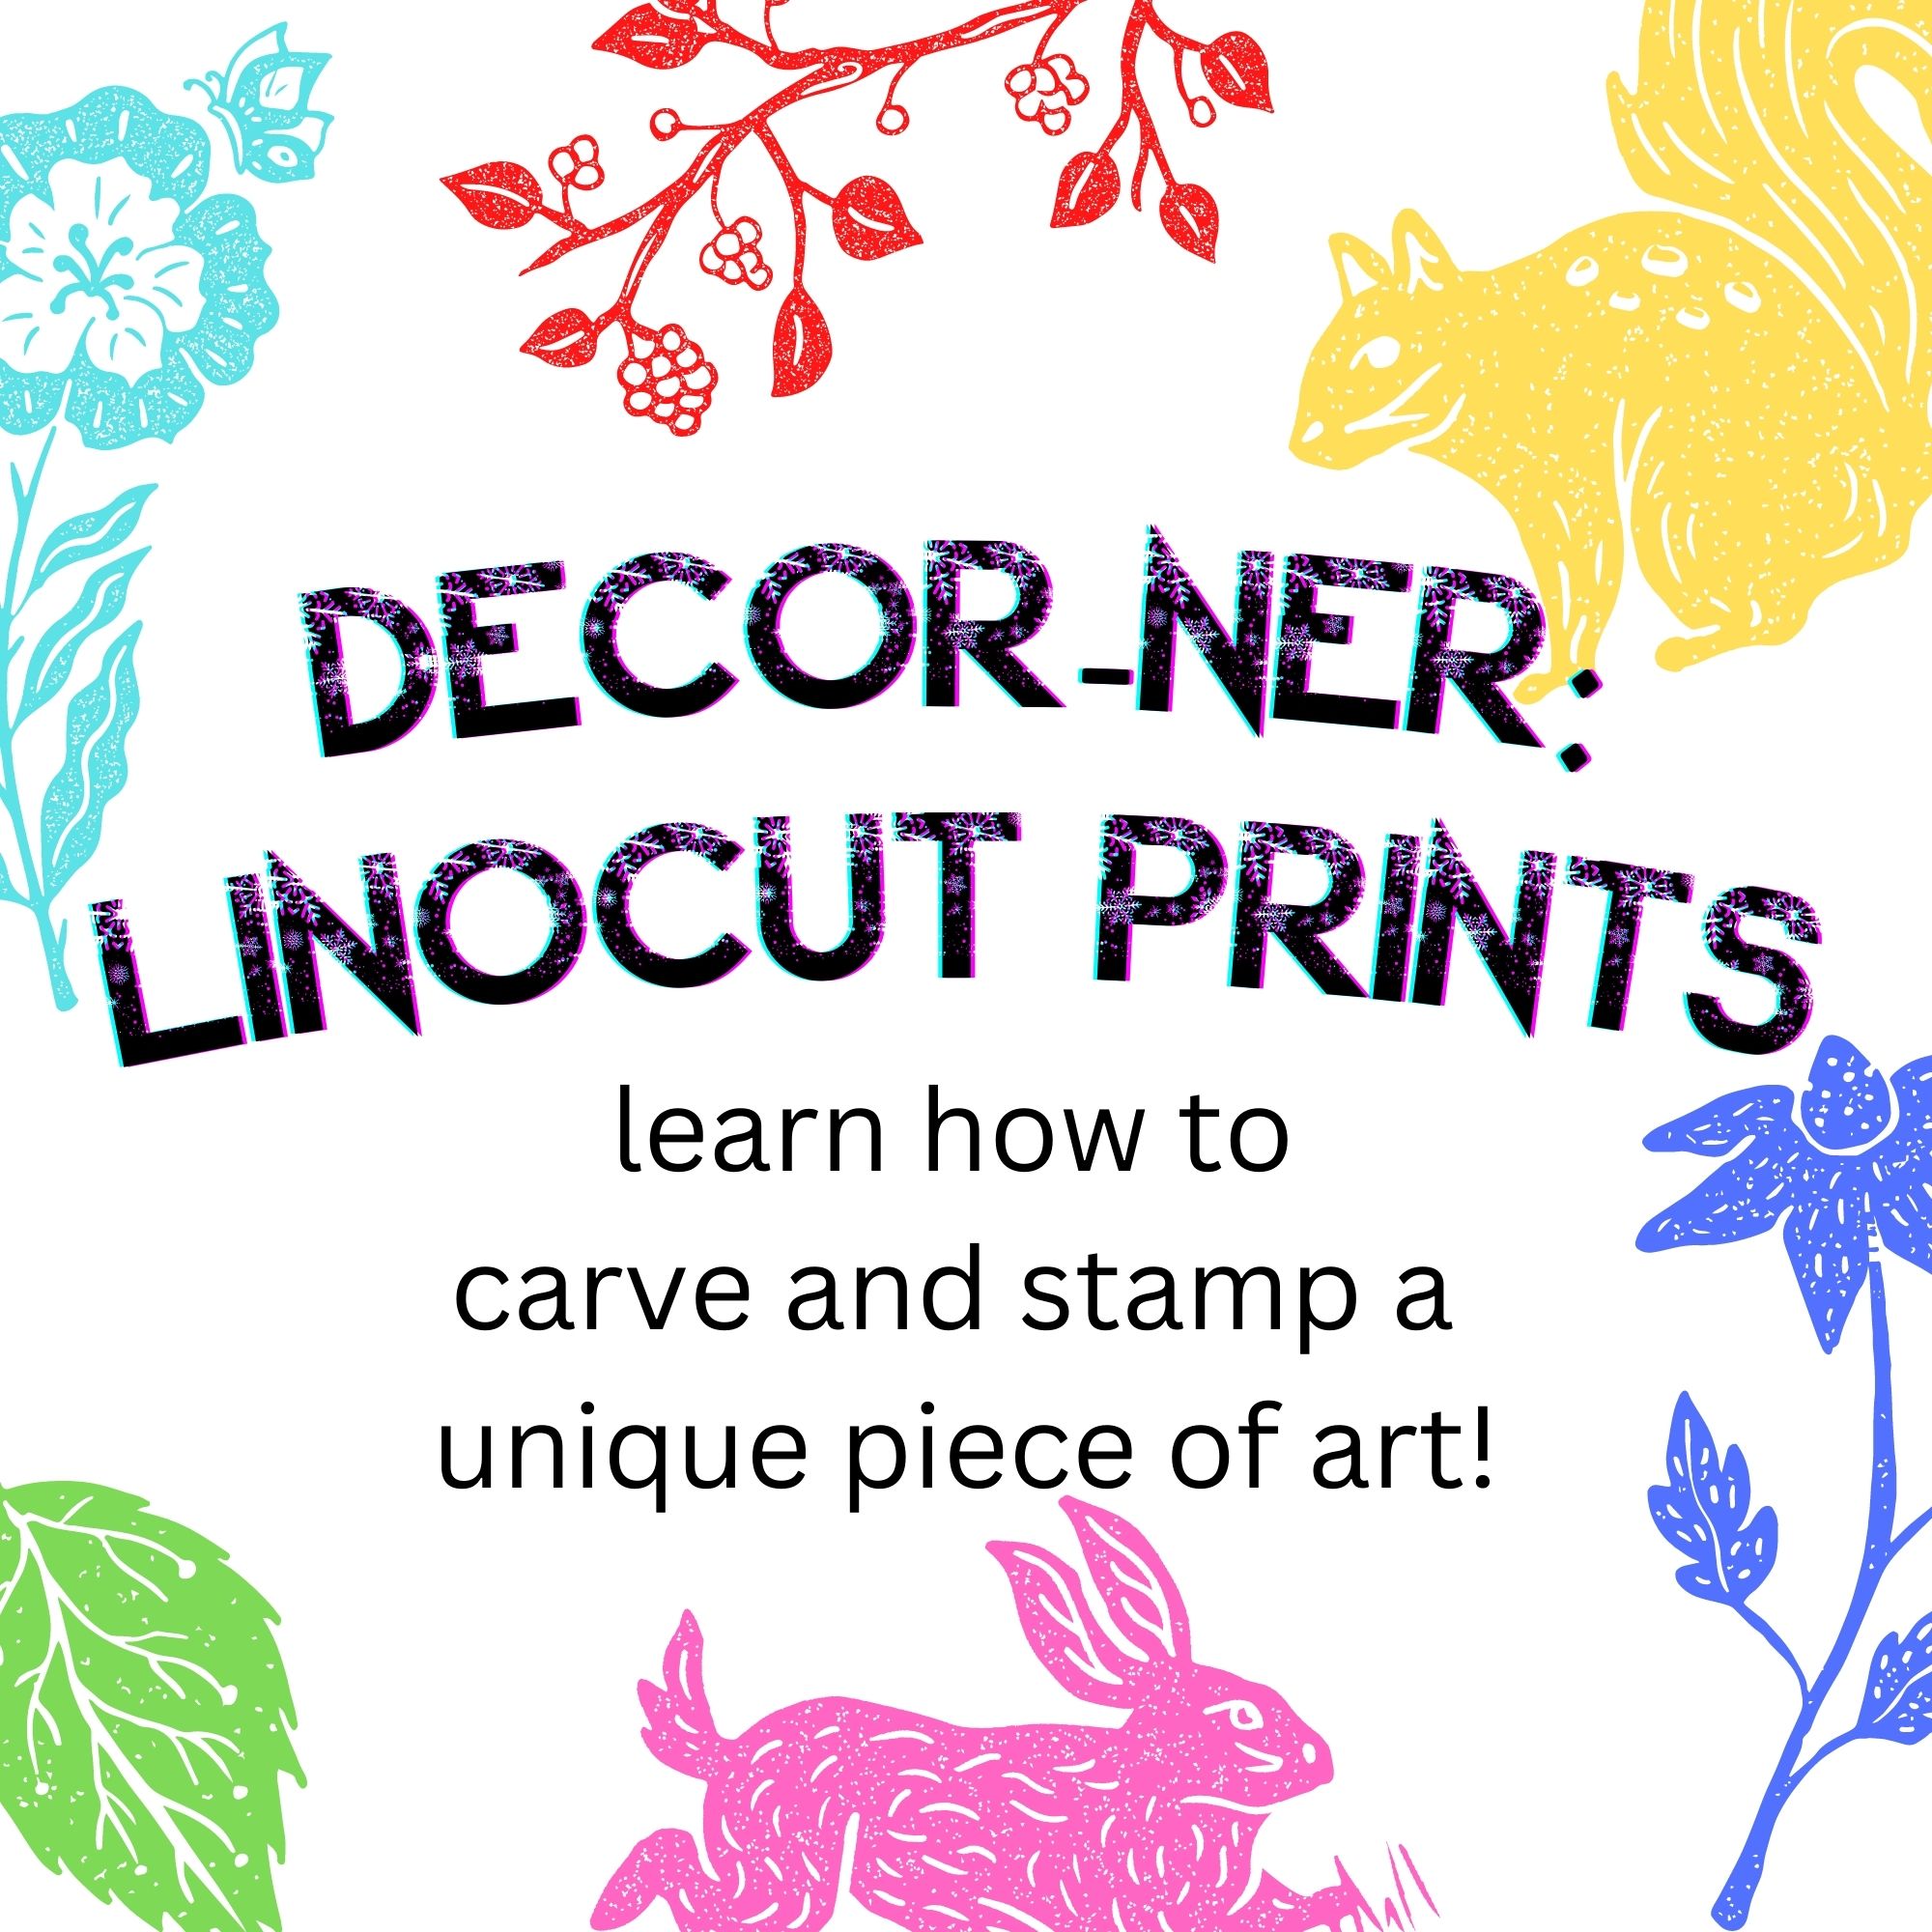 stamped images in many colors surrounding text that says Decor-ner: Linocut Prints